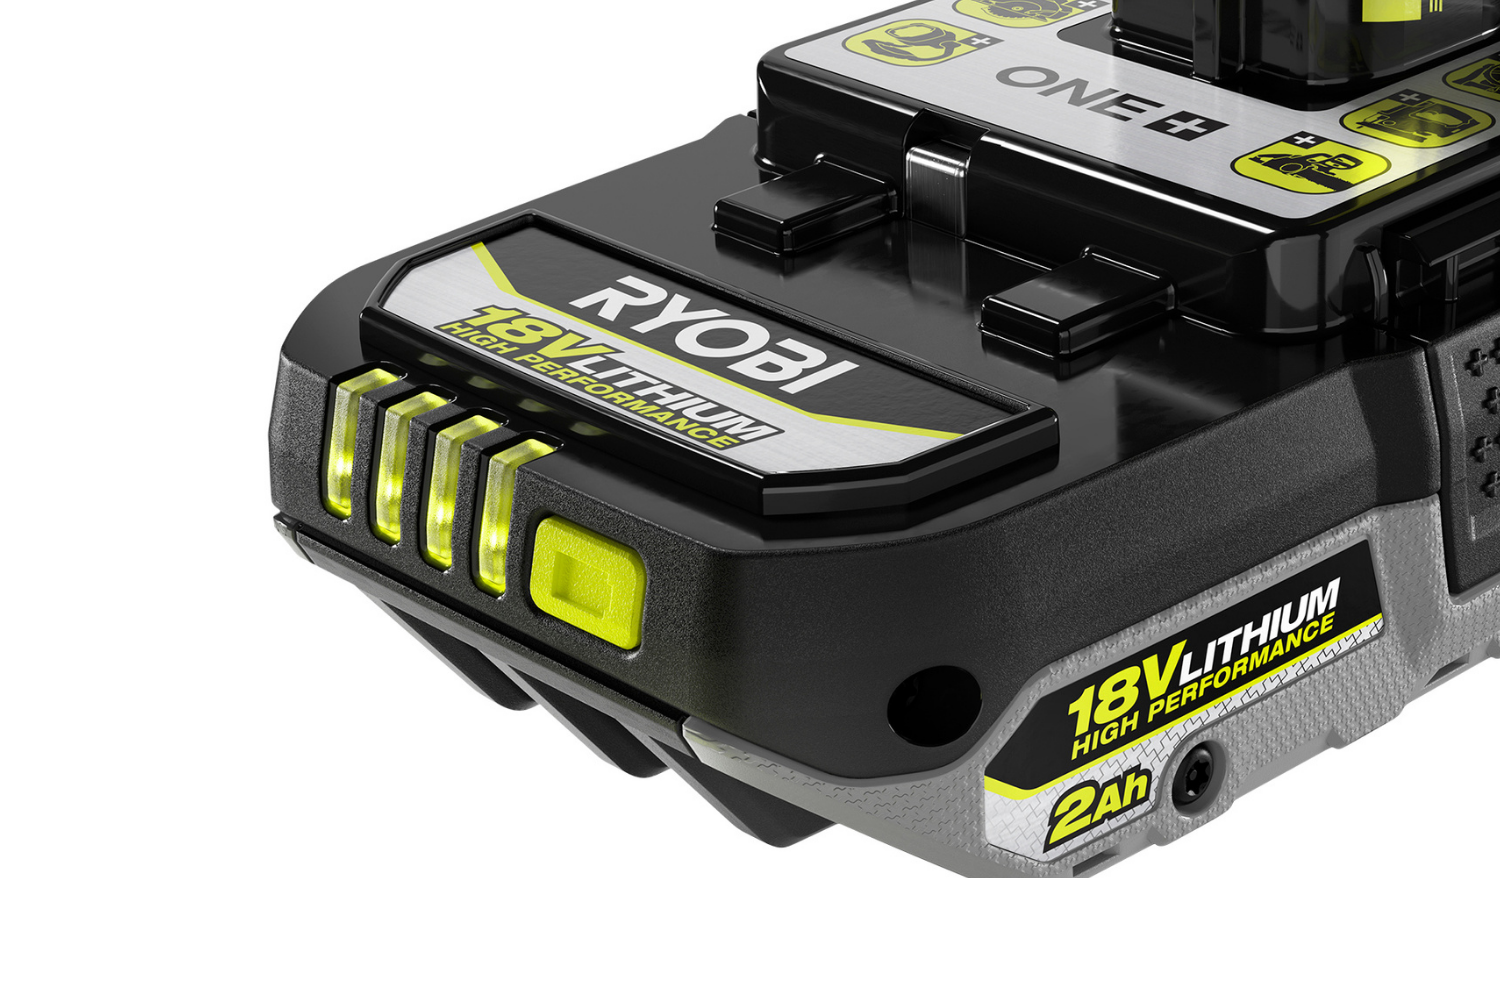 Product Features Image for 18V ONE+ 2.0 AH COMPACT HIGH PERFORMANCE BATTERY (2-PACK).